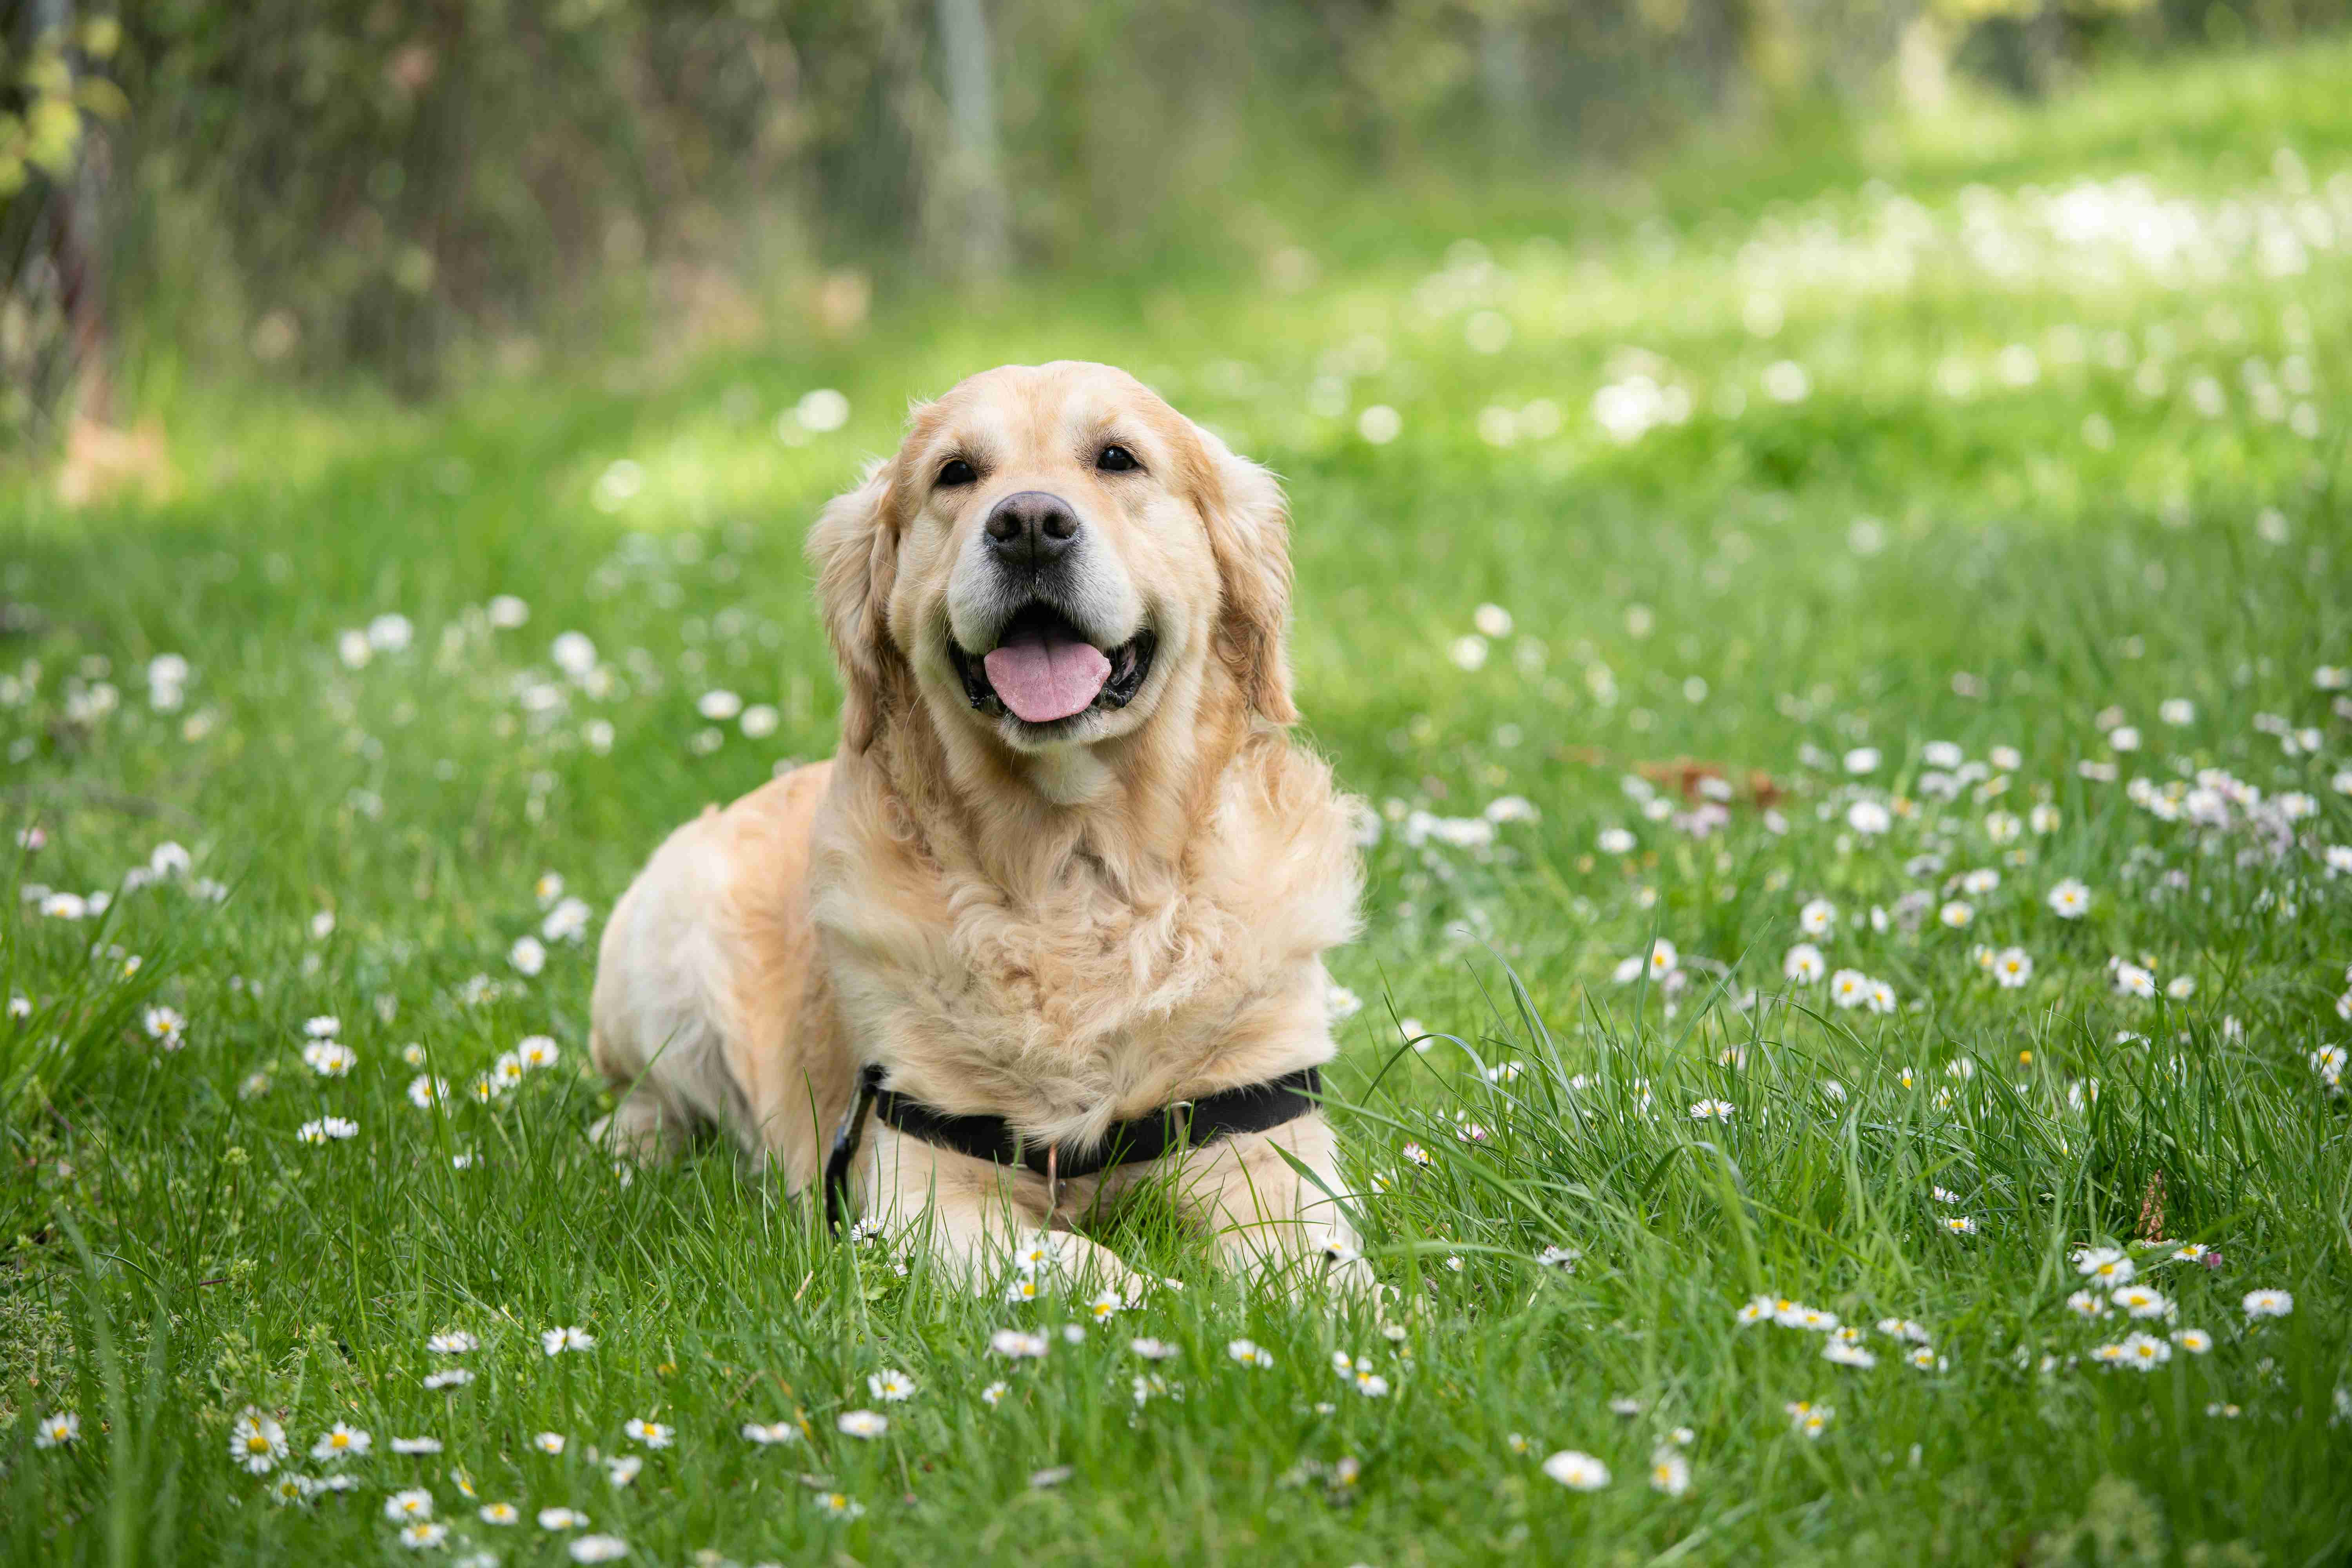 Crate Training a Golden Retriever: Tips and Best Practices for a Happy Family Home